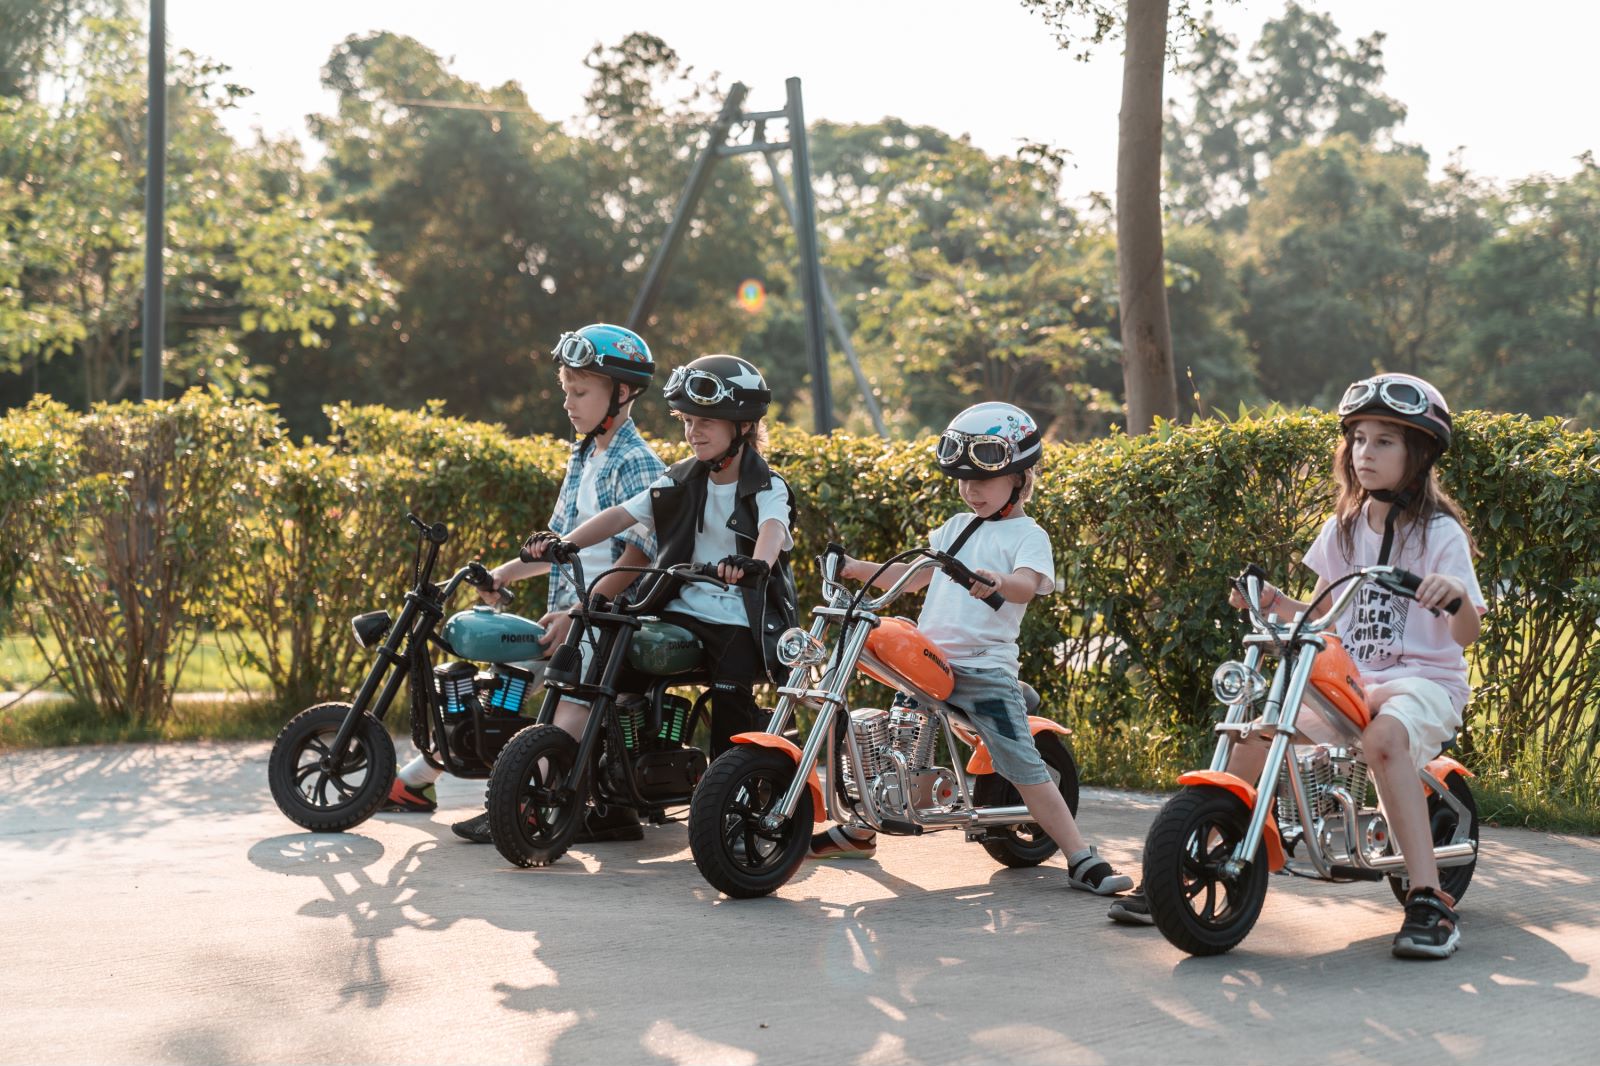 Kids Mini Motorcycles - Which One Should You Buy?